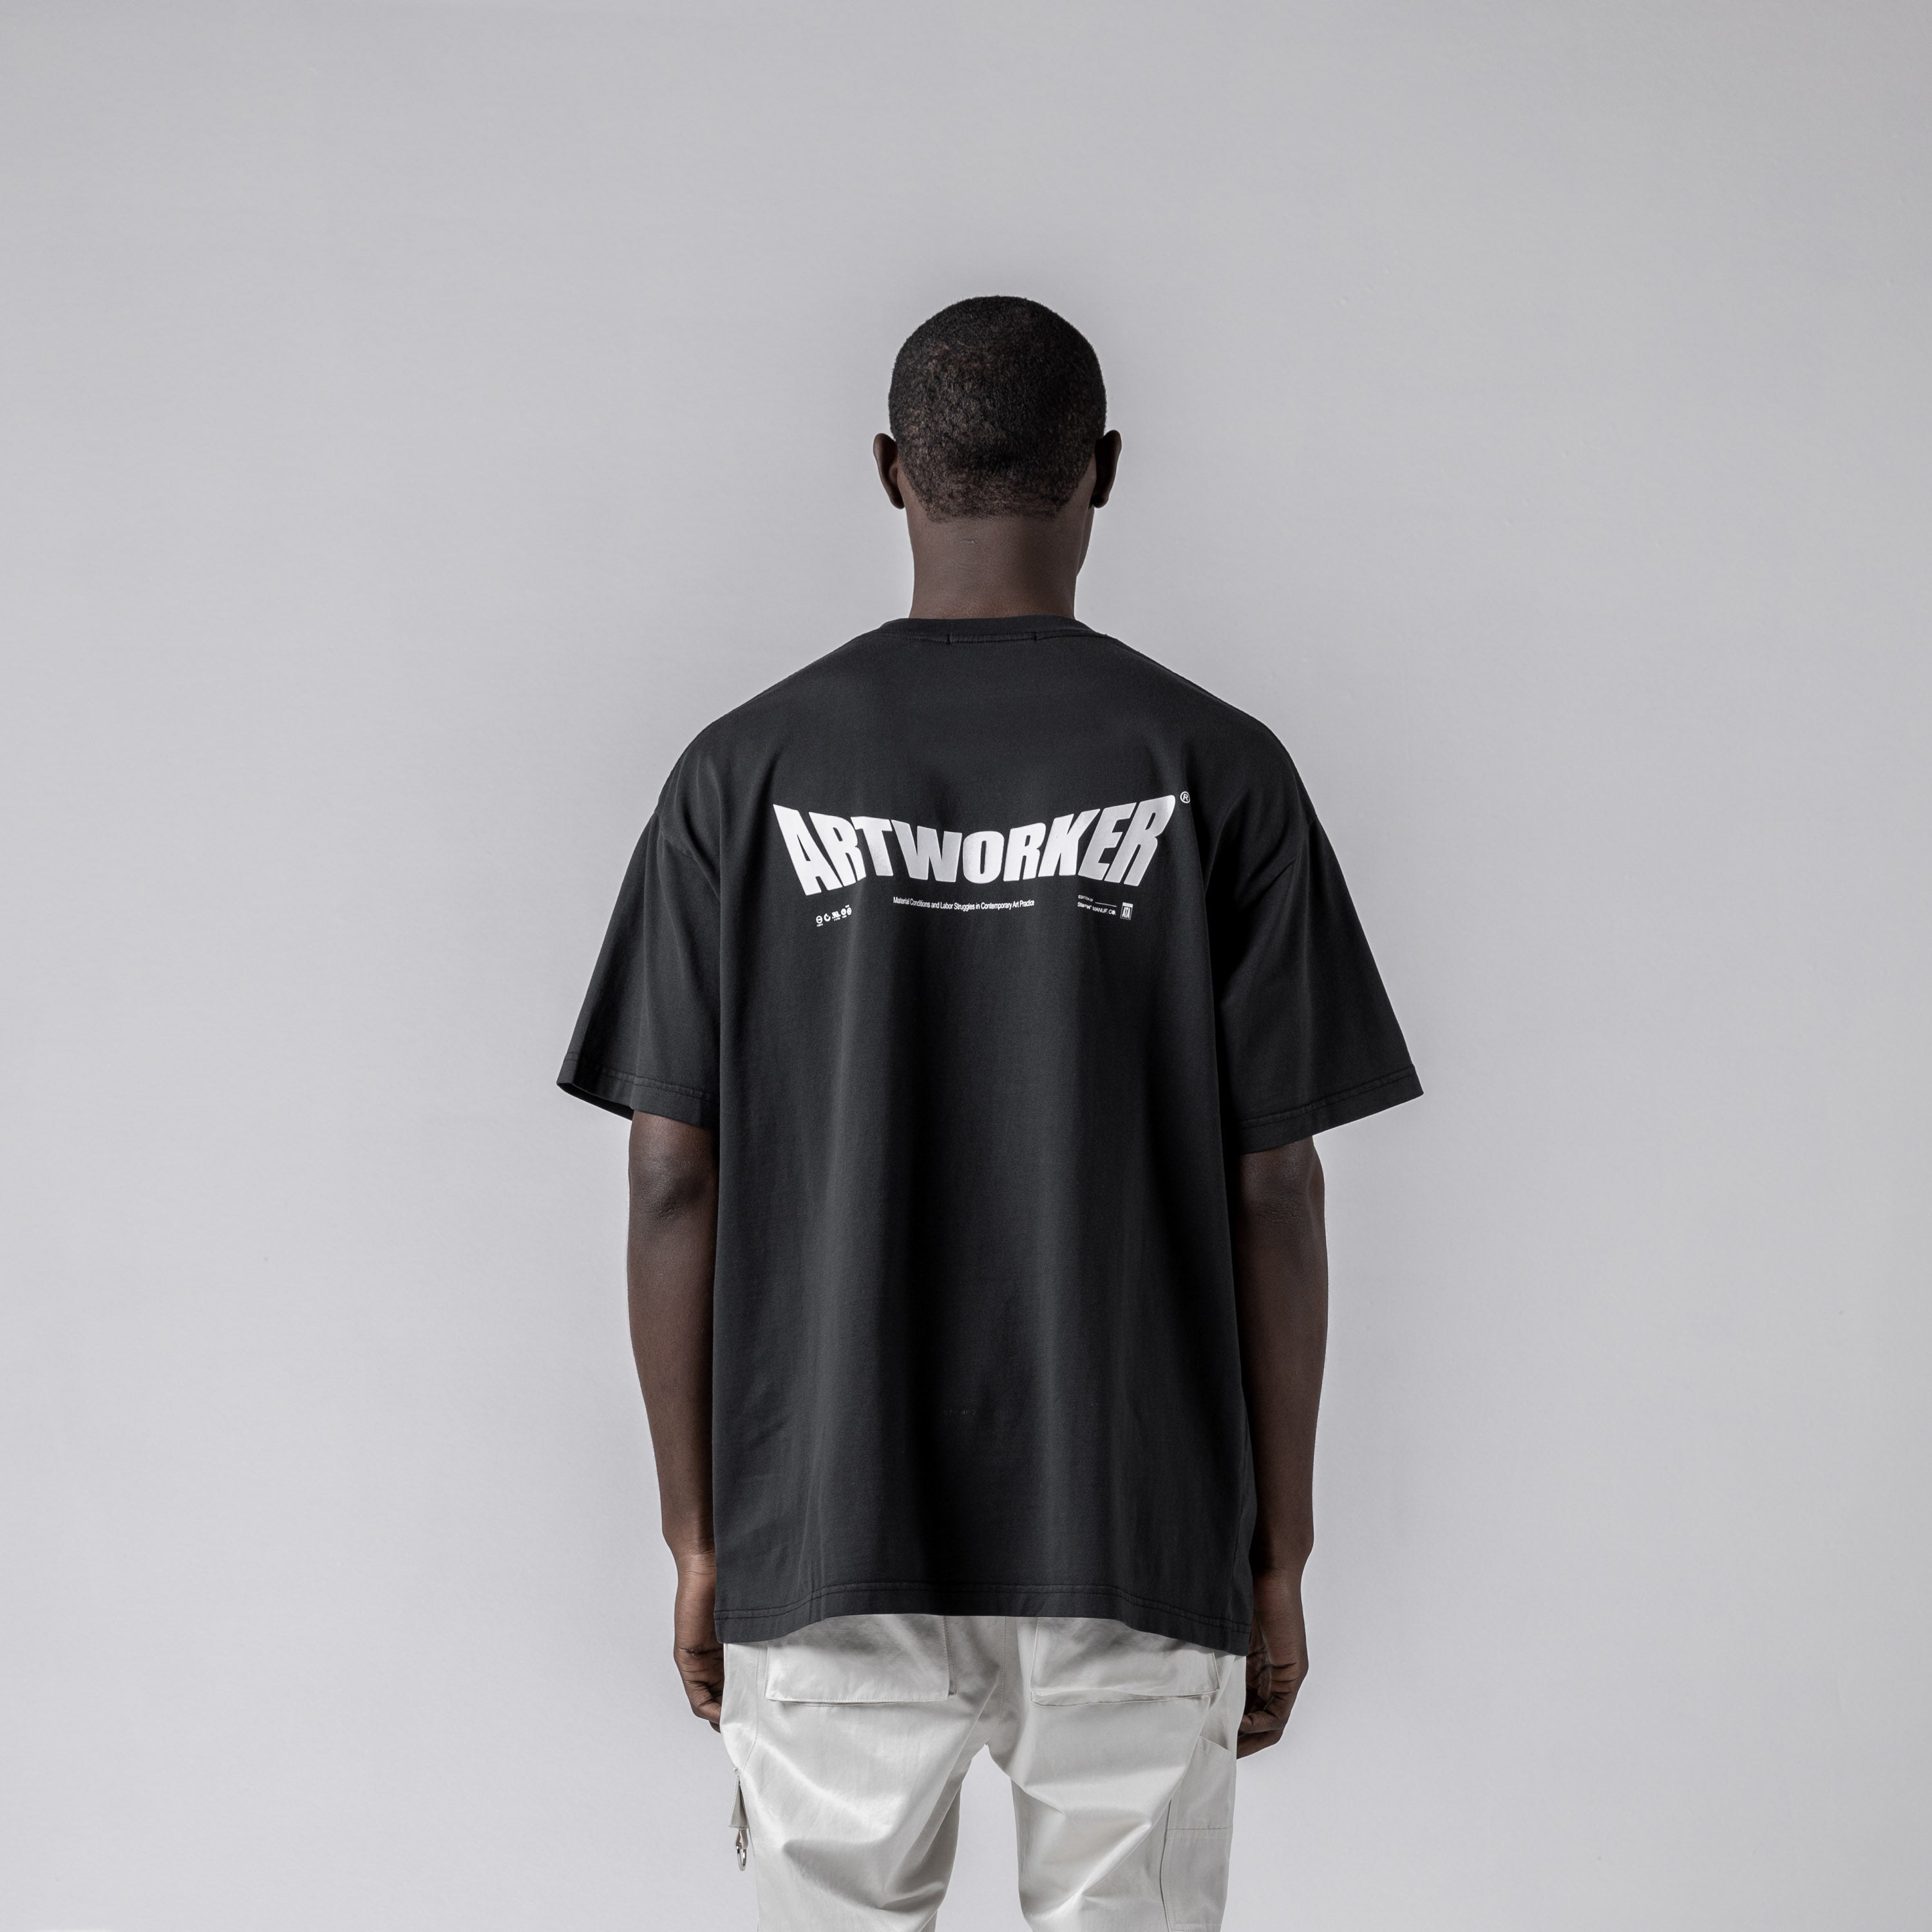 Artworker Relaxed Tee